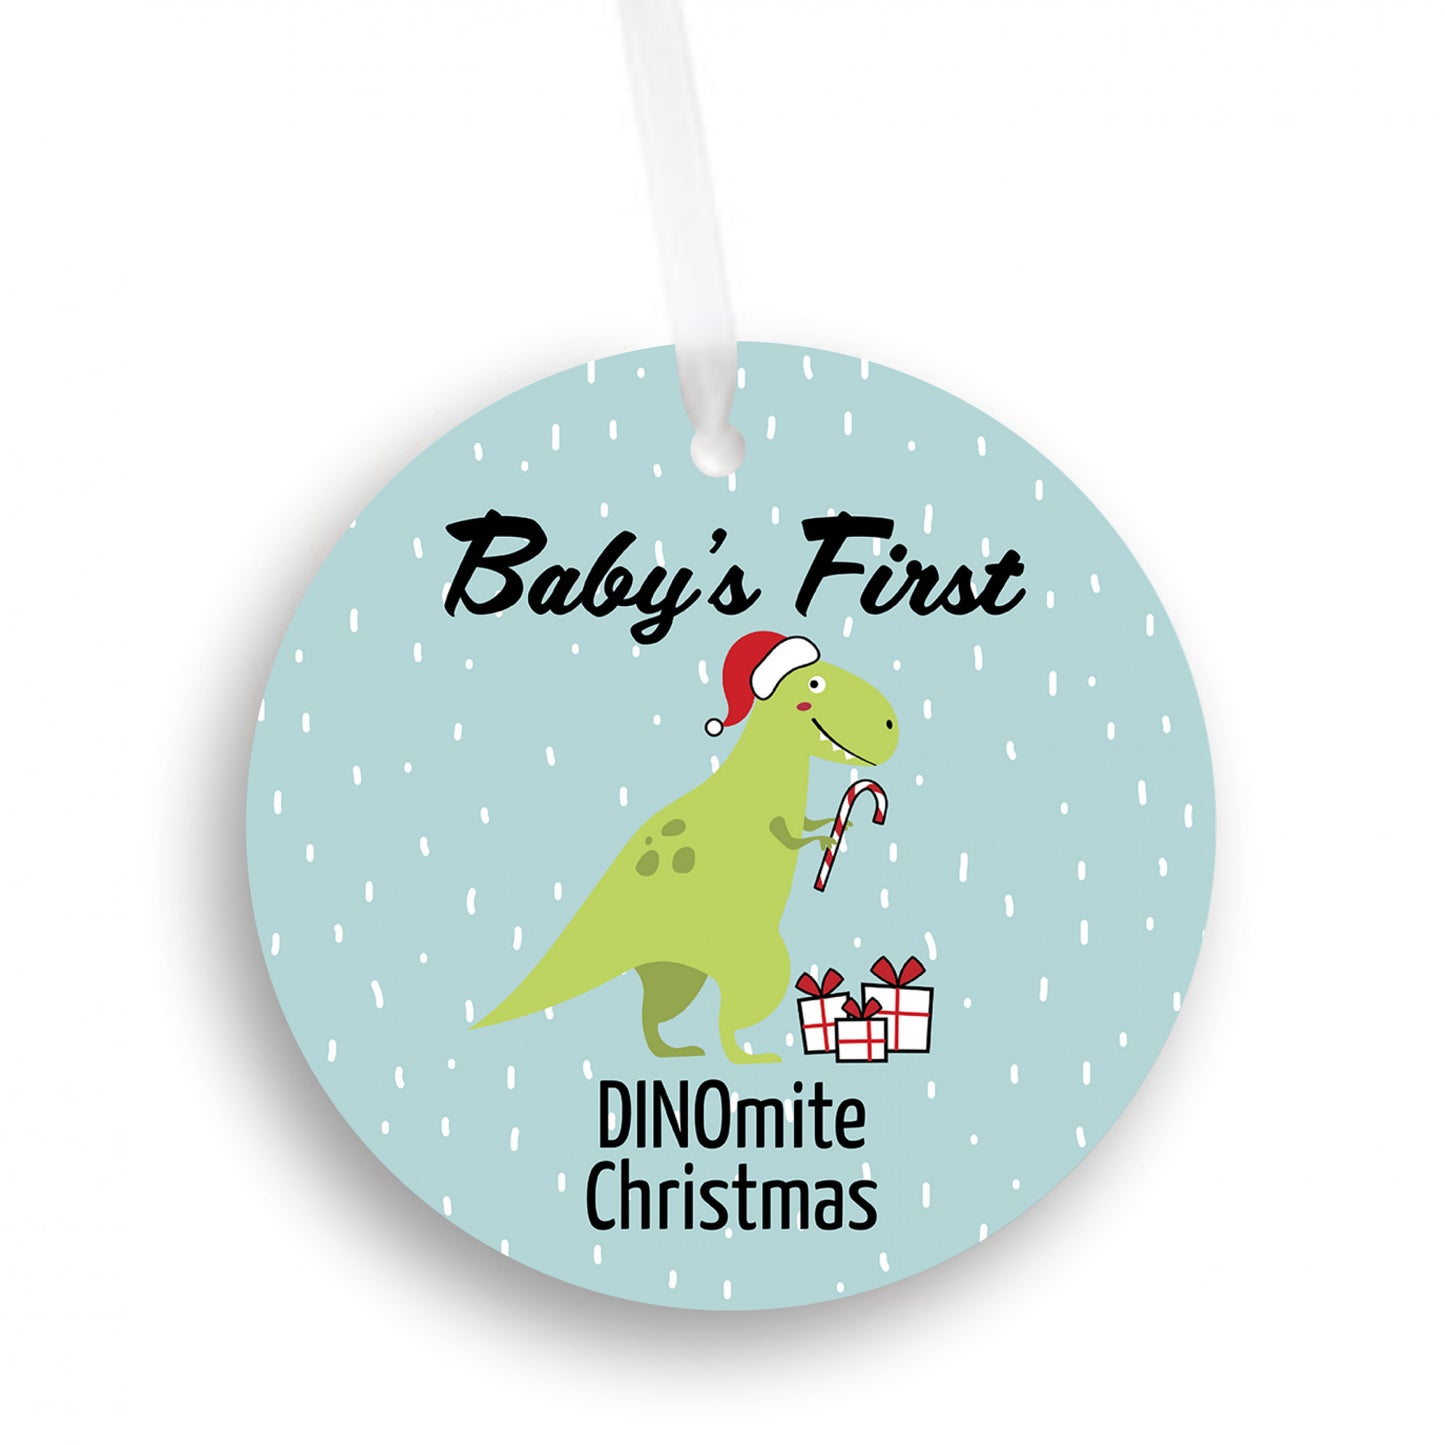 Baby's First DINOmite Christmas